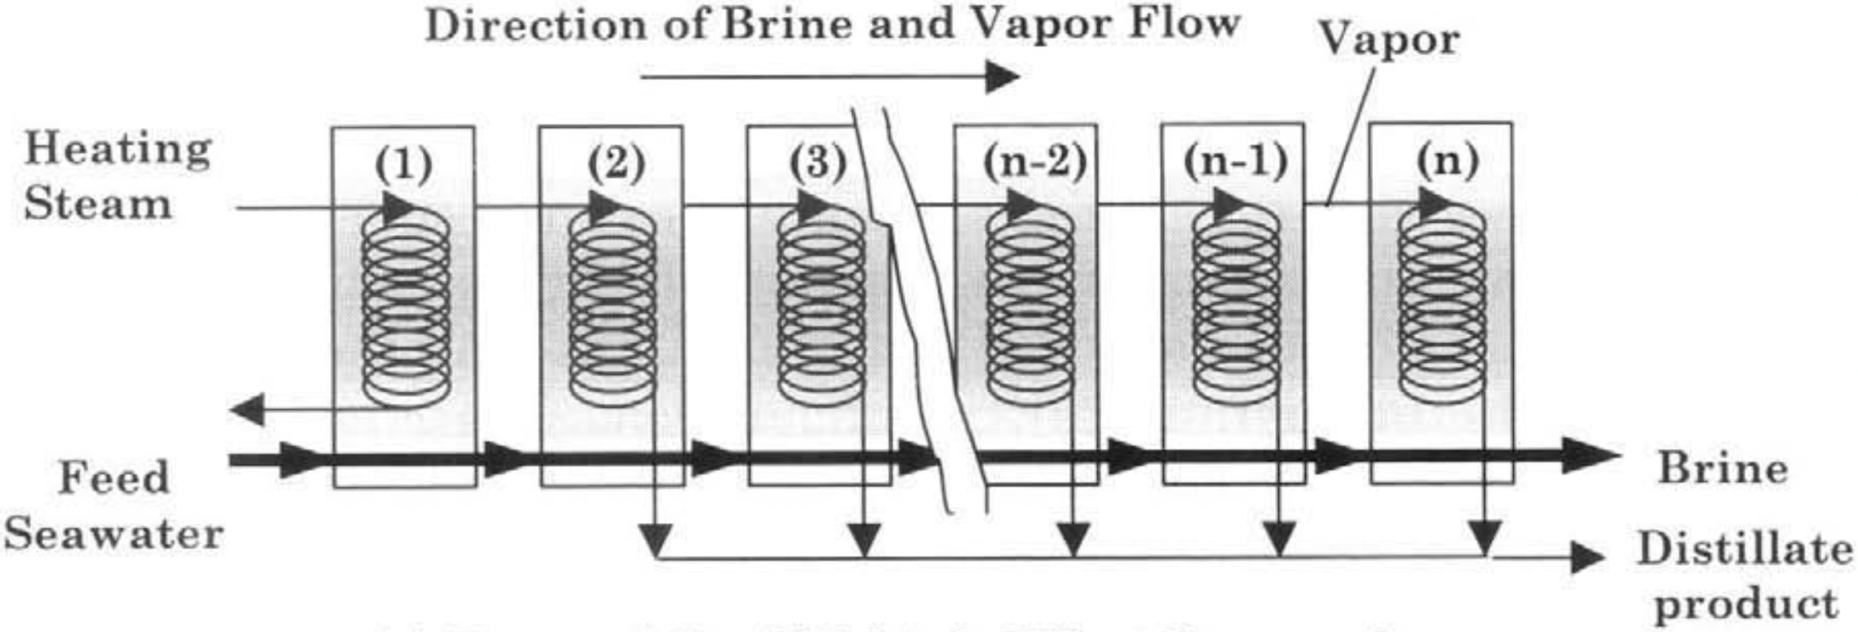 Multi-effect distillation (Reprinted from El-Dessouky and Ettouney with permission from Elsevier, Copyright 2002)